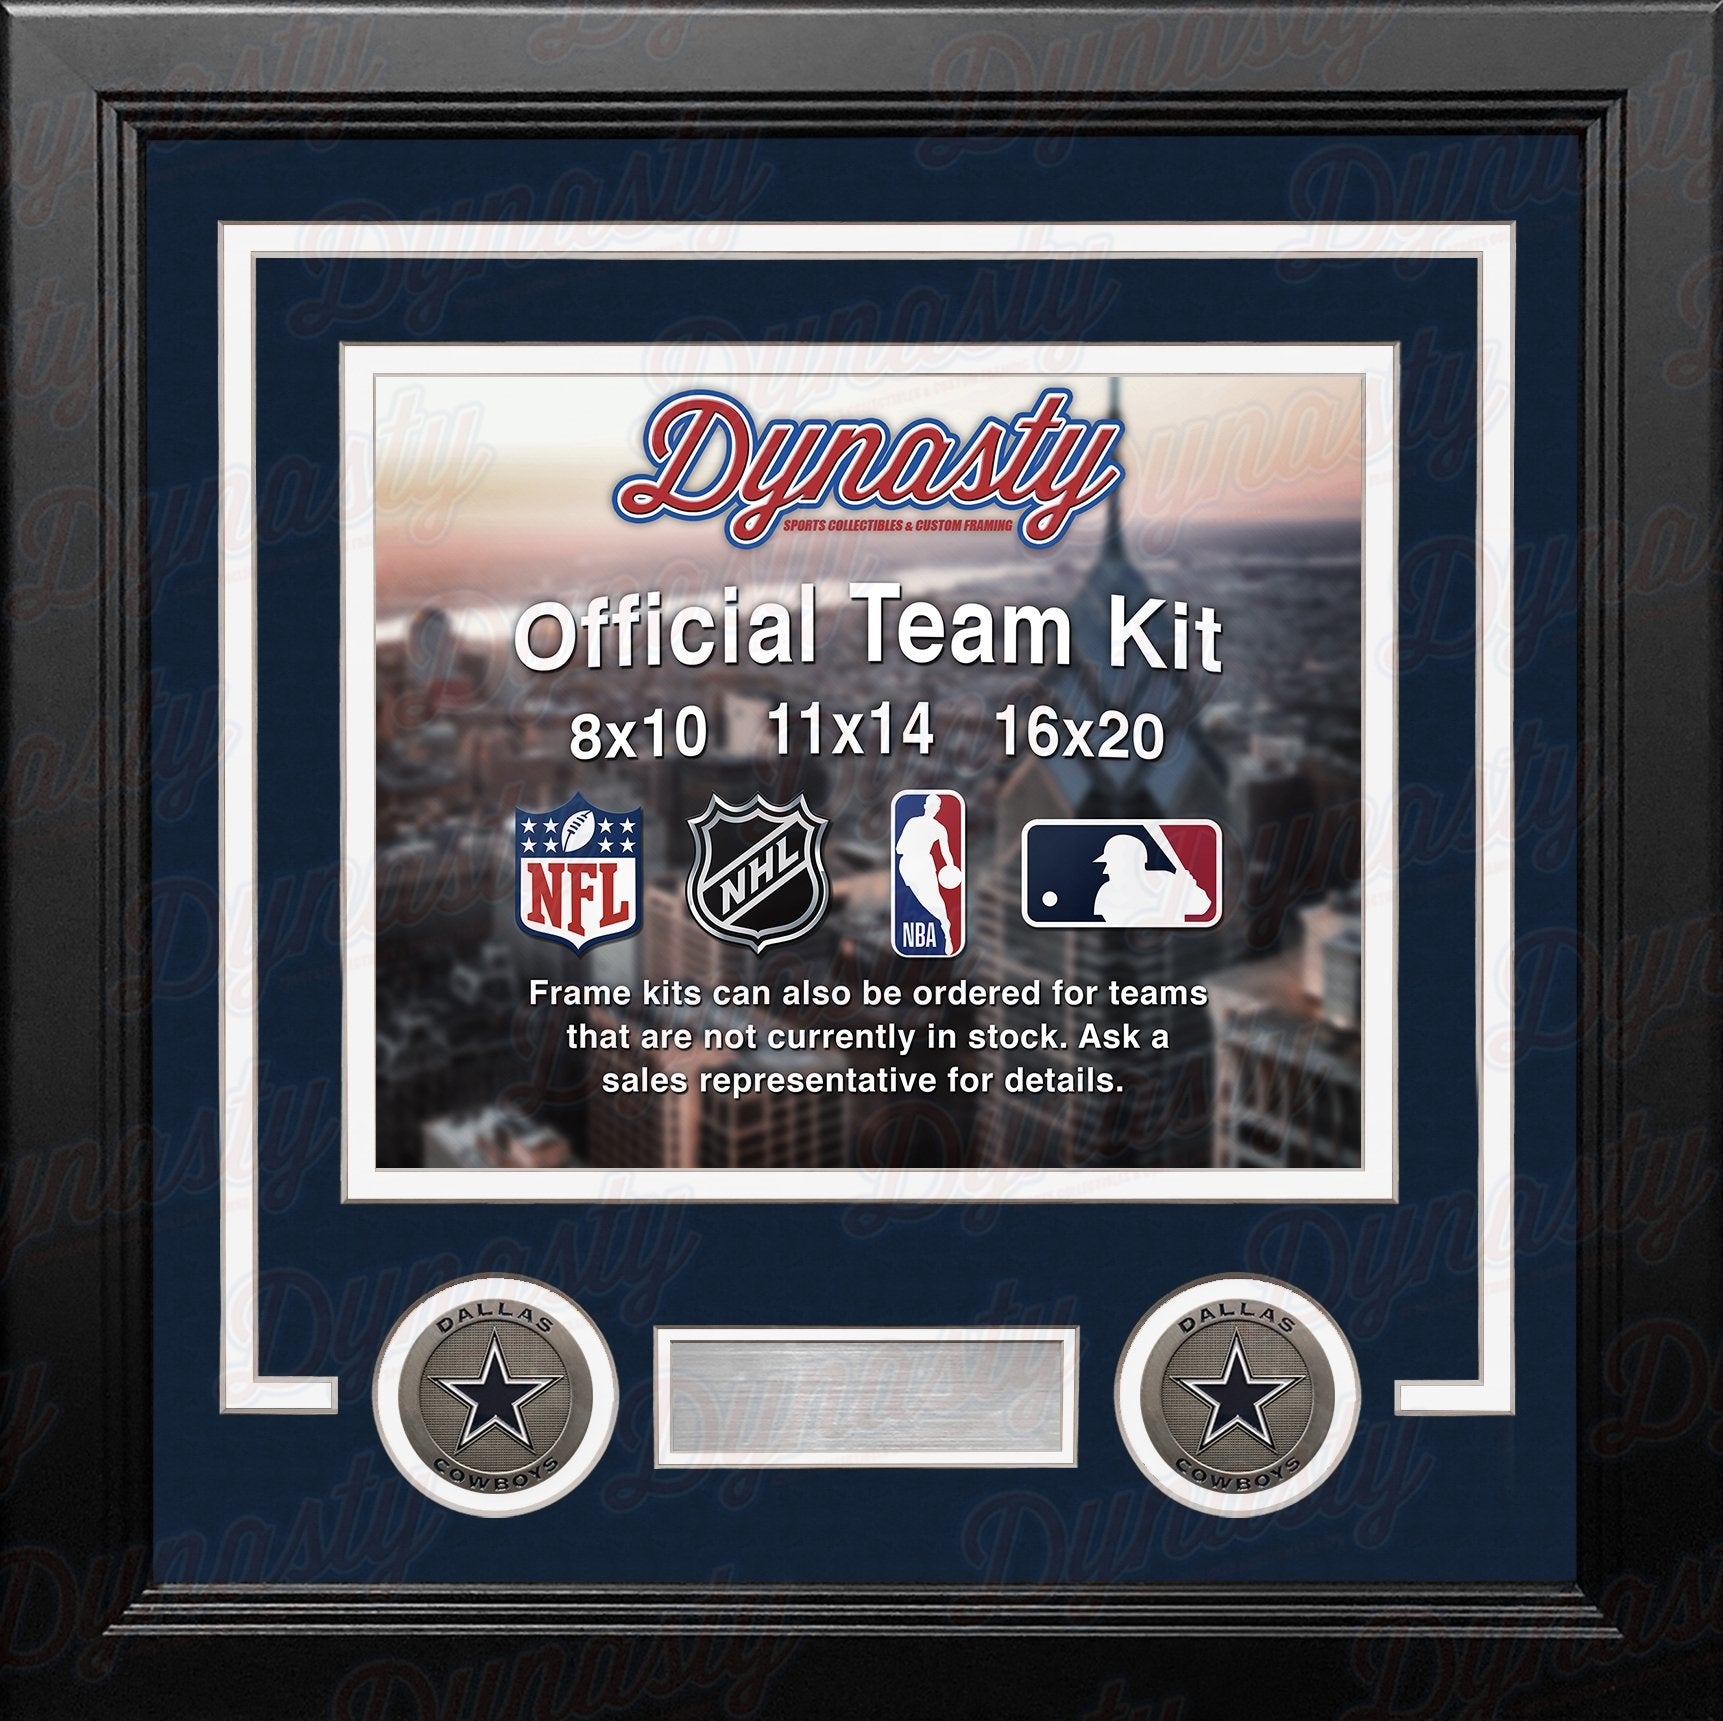 Dallas Cowboys Custom NFL Football 8x10 Picture Frame Kit (Multiple Colors) - Dynasty Sports & Framing 